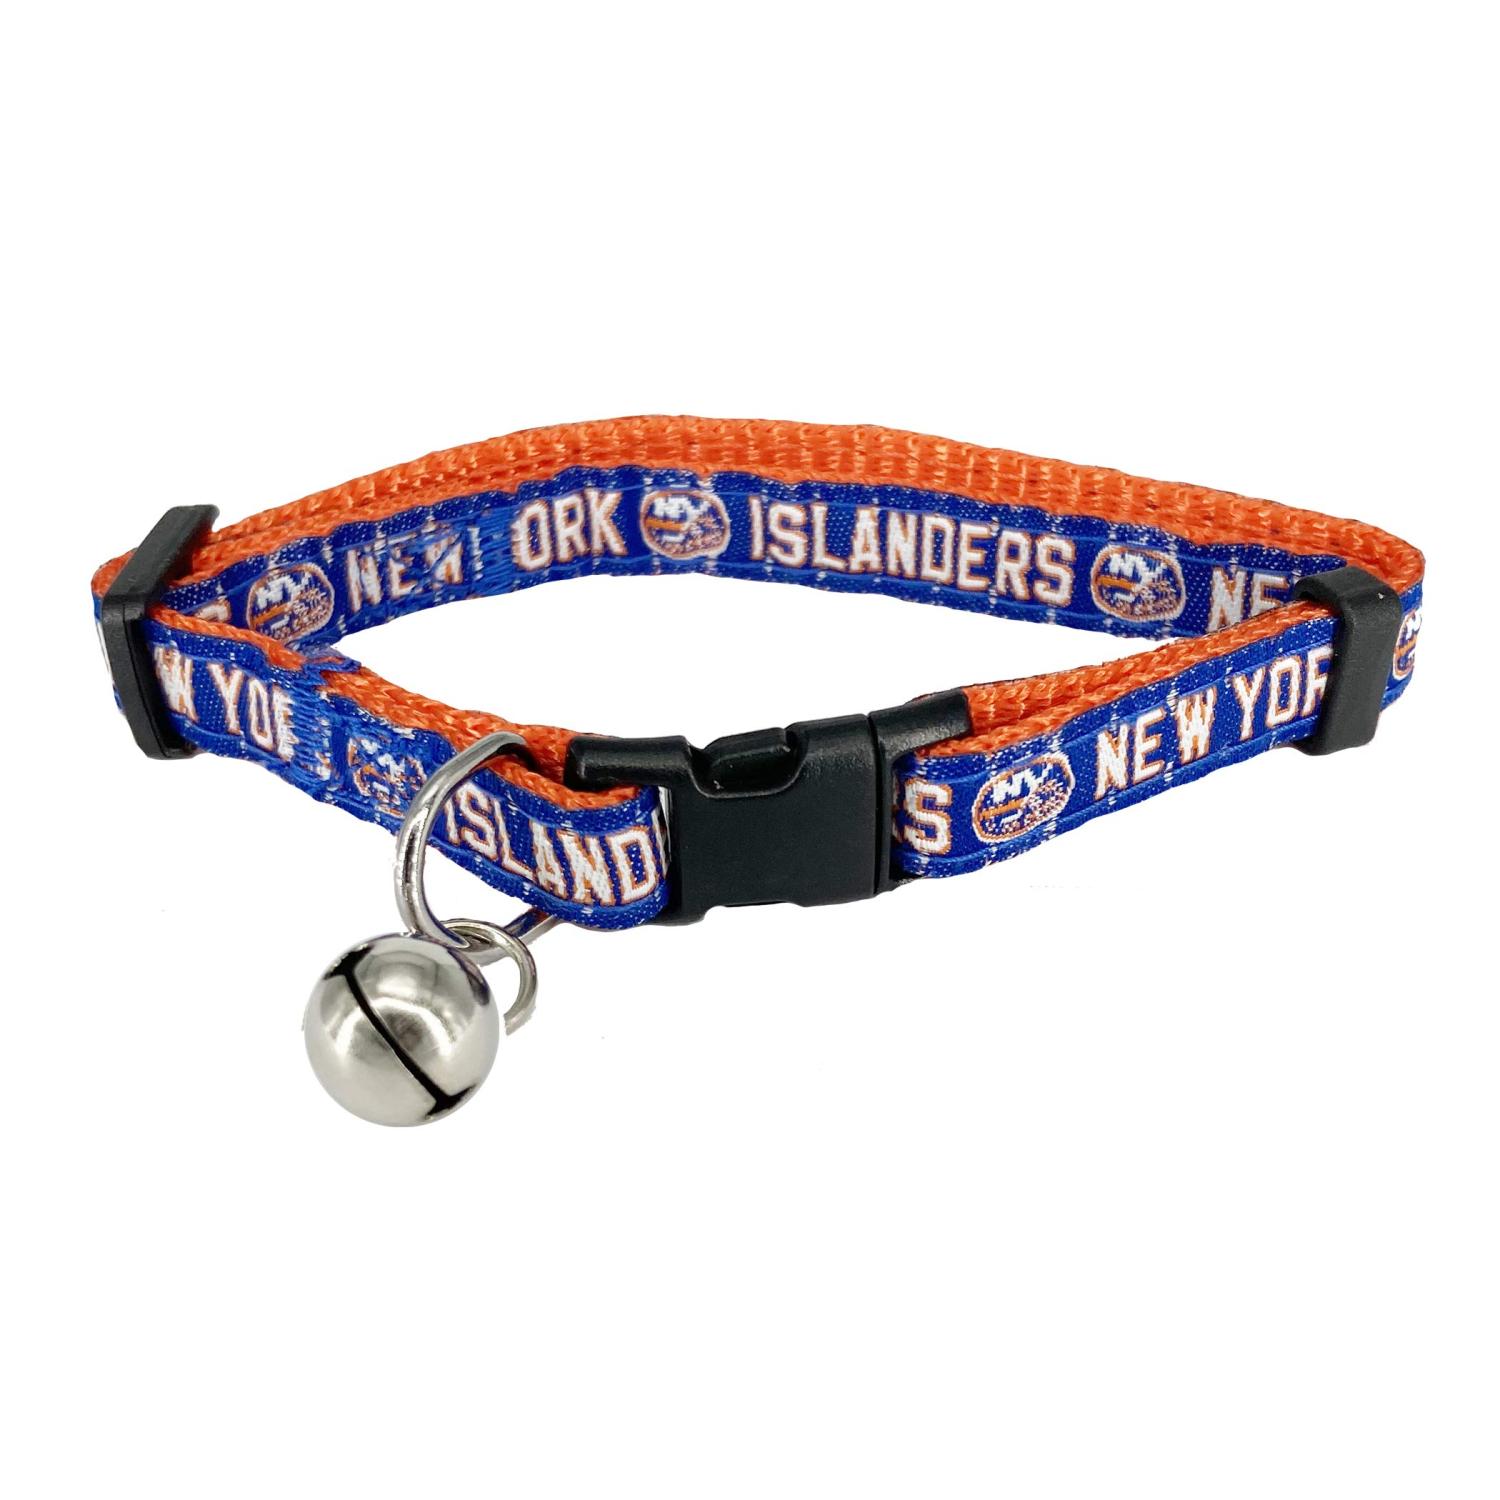 Pets First NHL Saint Louis Blues CAT Collar Adjustable Break-Away Collar  for Cats with Licensed Team Name & Logo. Cute & Fashionable Hockey Sports  Cat